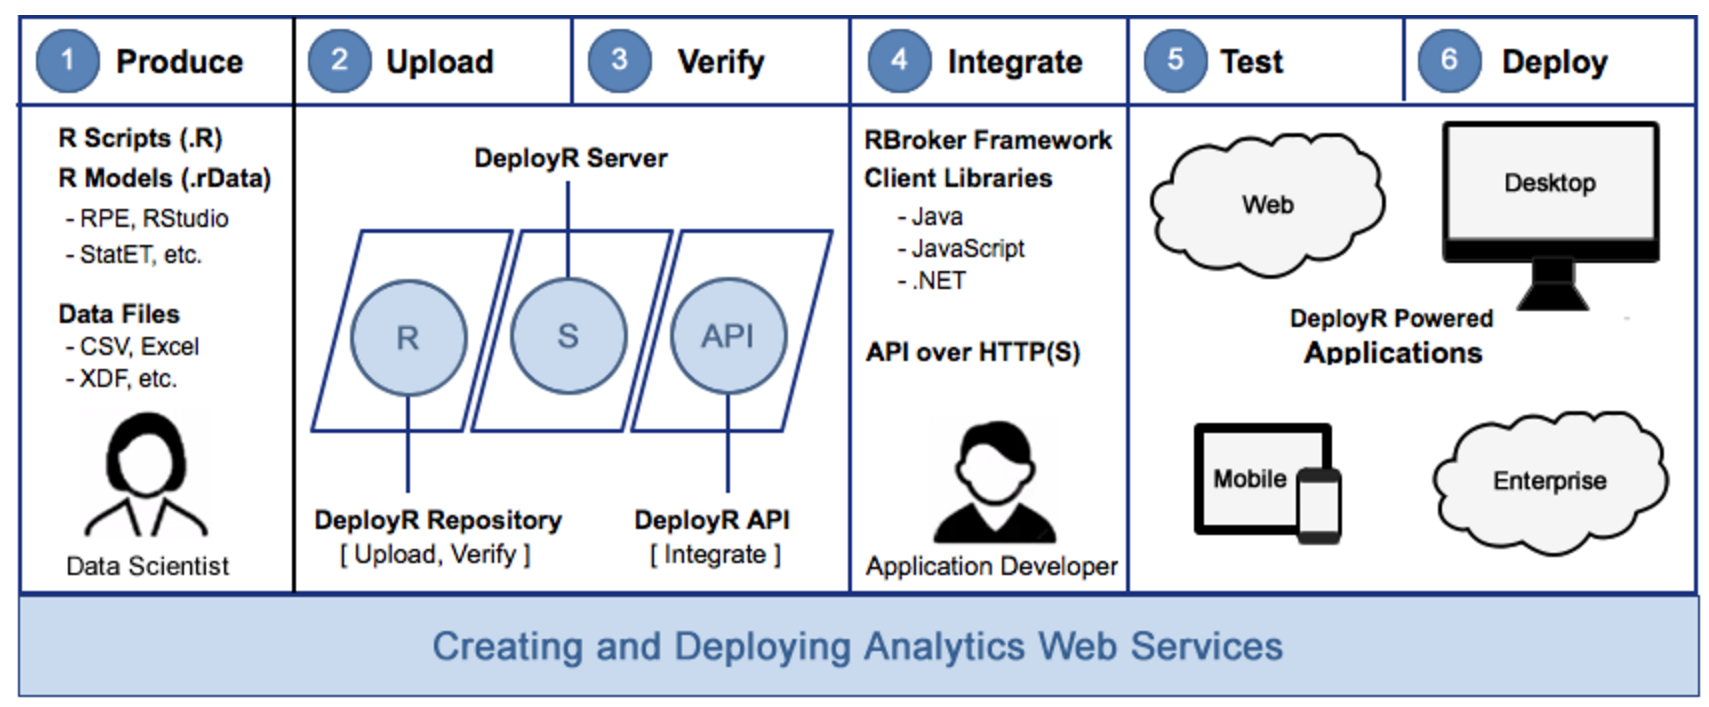 Create and Deploy Analytics Web Services